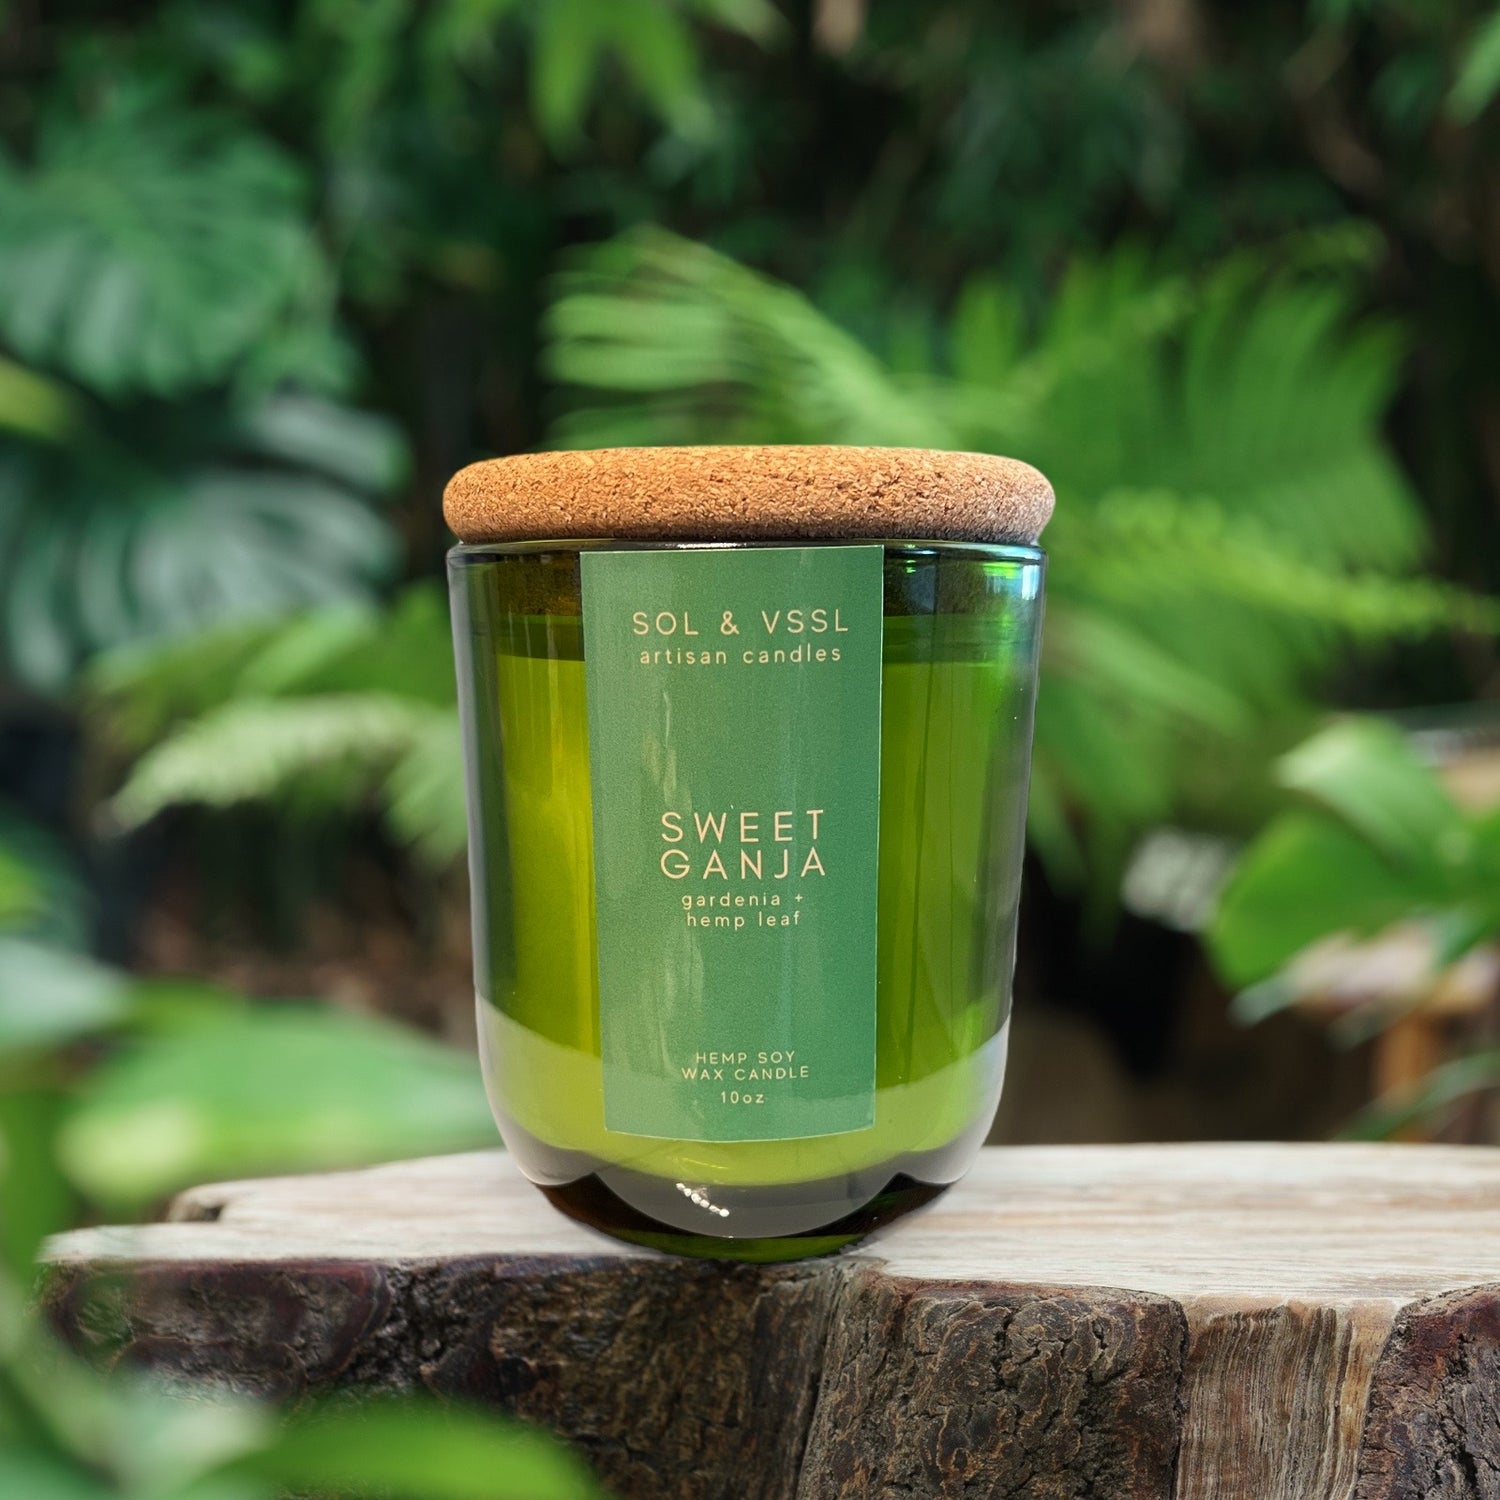 HEMP SOY SOPHISTICATED CANNABIS INSPIRED CANDLES